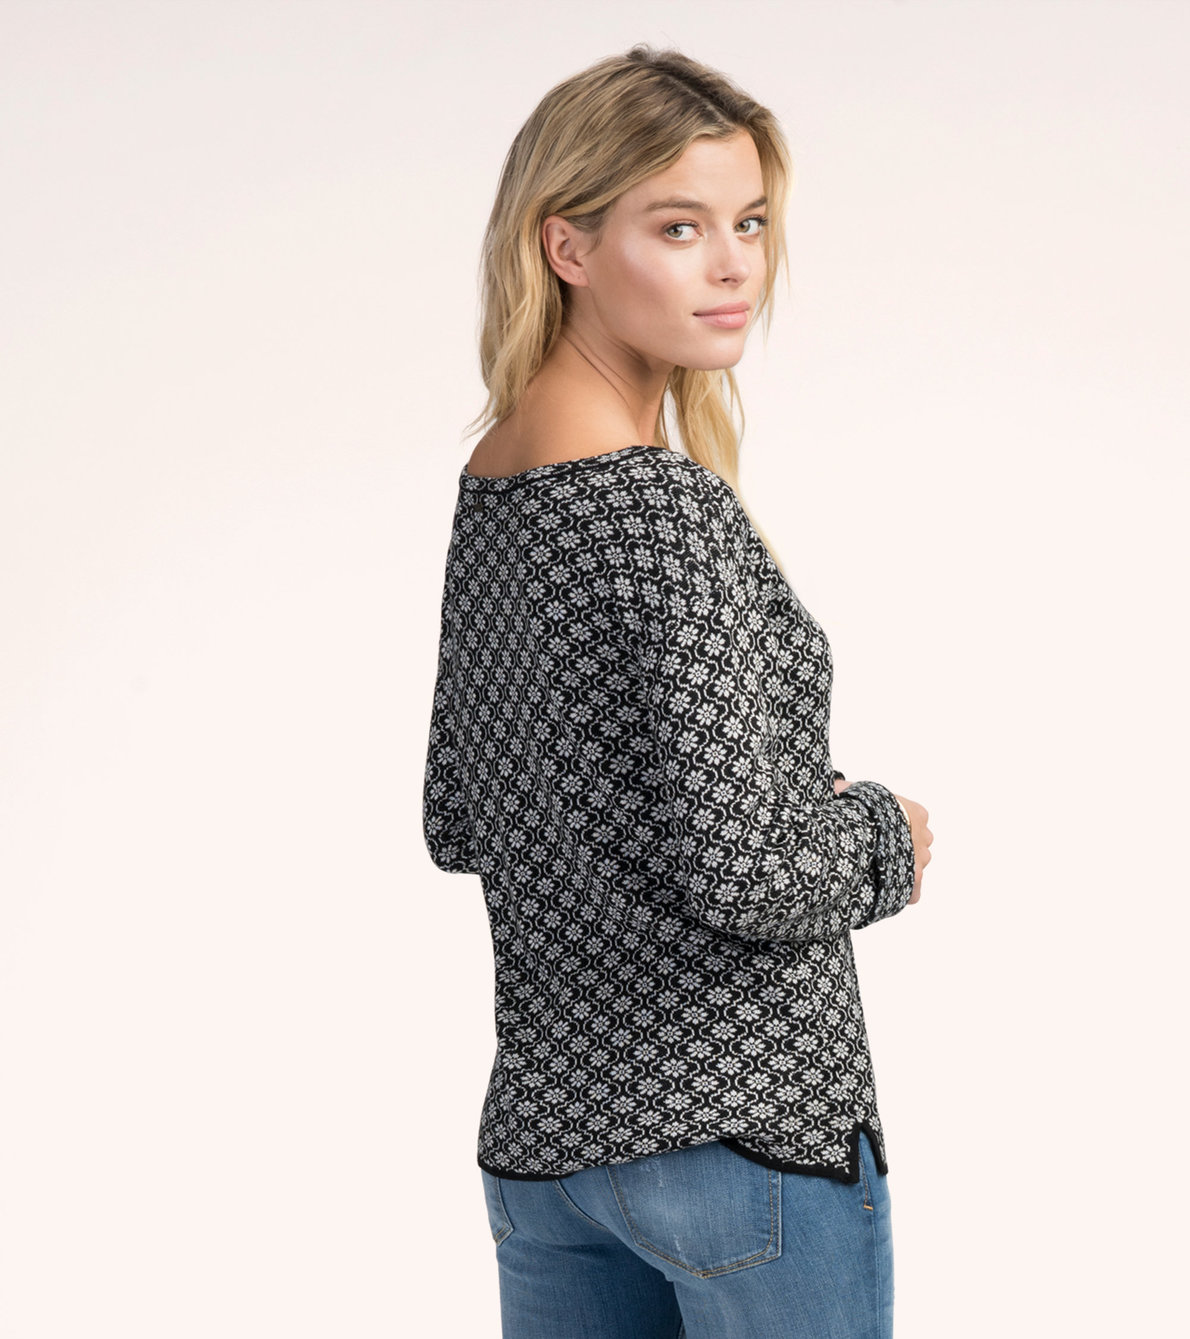 View larger image of Medallion Blooms Renee Jacquard Sweater